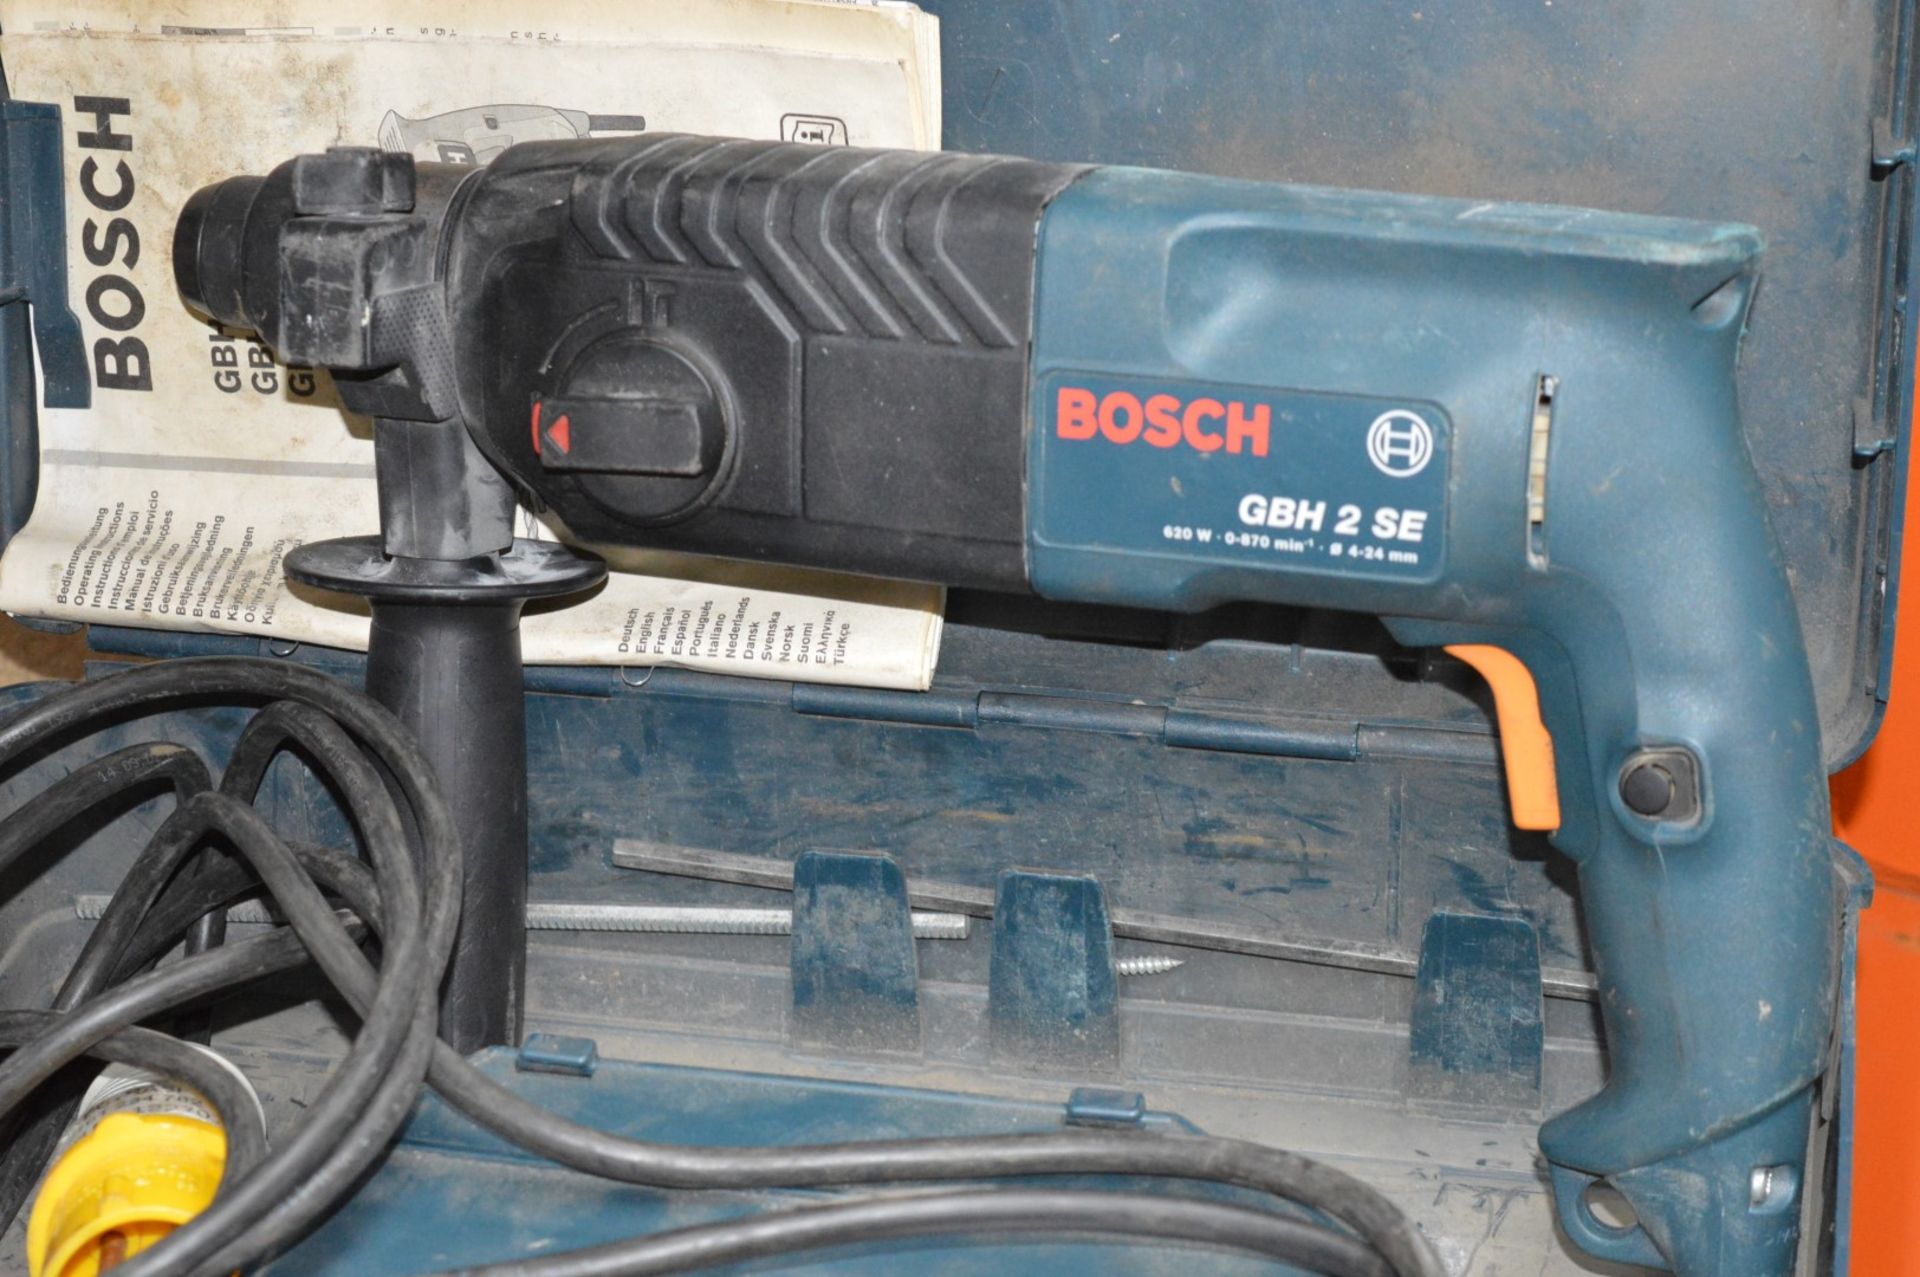 1 x Bosch Rotary Hammer Drill - 110v - Model GBH 2 SE - Includes Protective Case - Tested and - Image 2 of 2